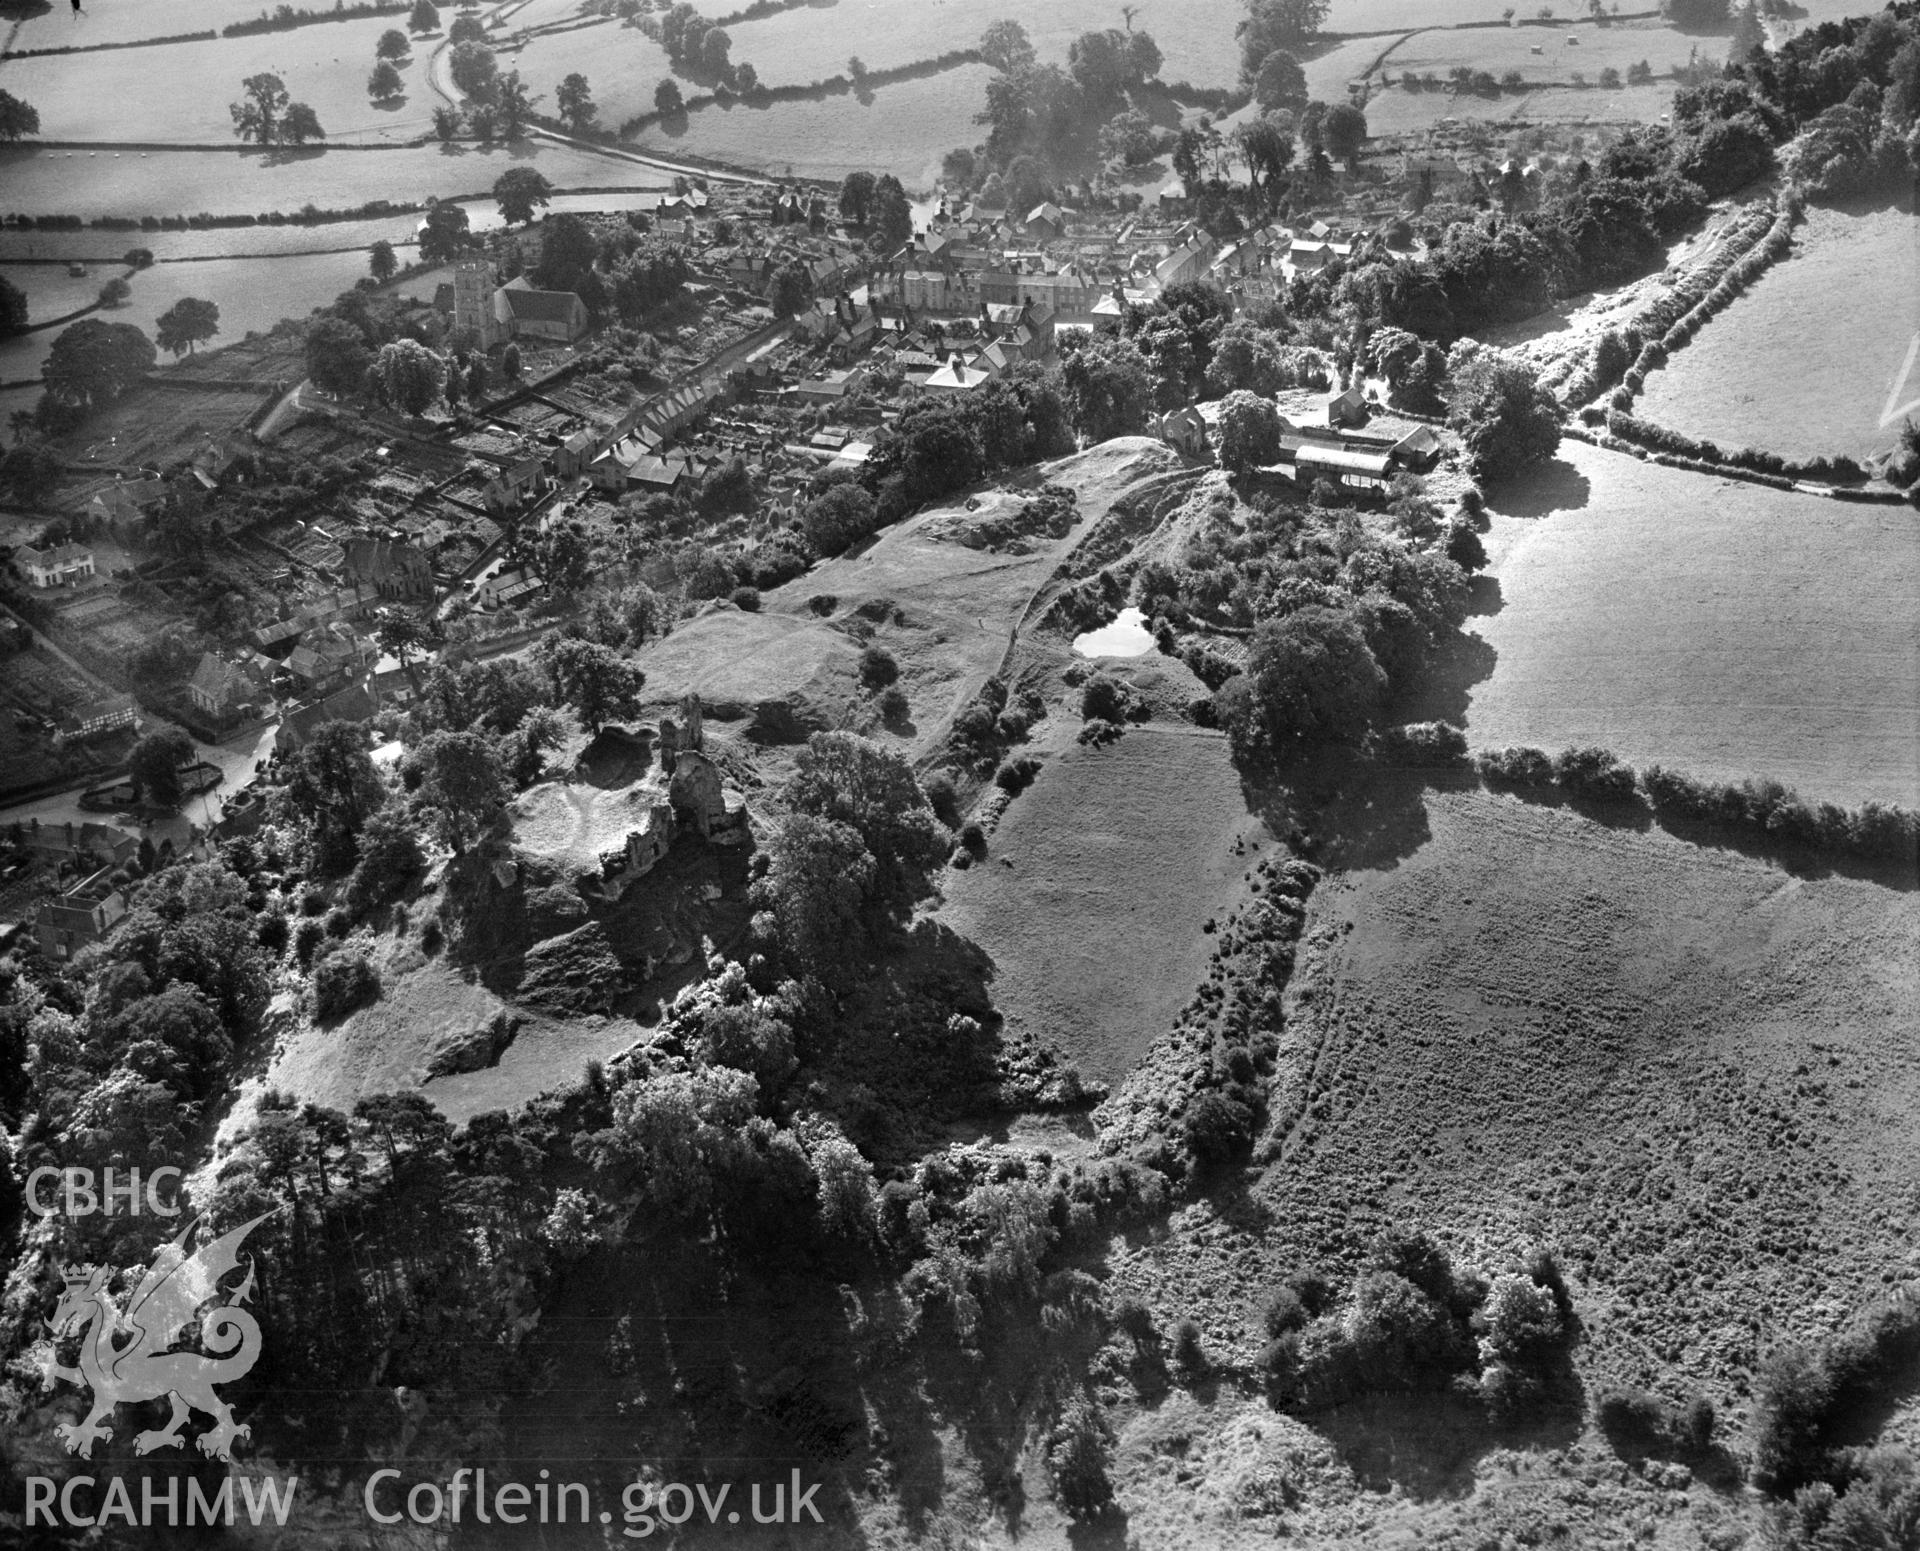 General view of Montgomery, showing castle, oblique aerial view. 5?x4? black and white glass plate negative.